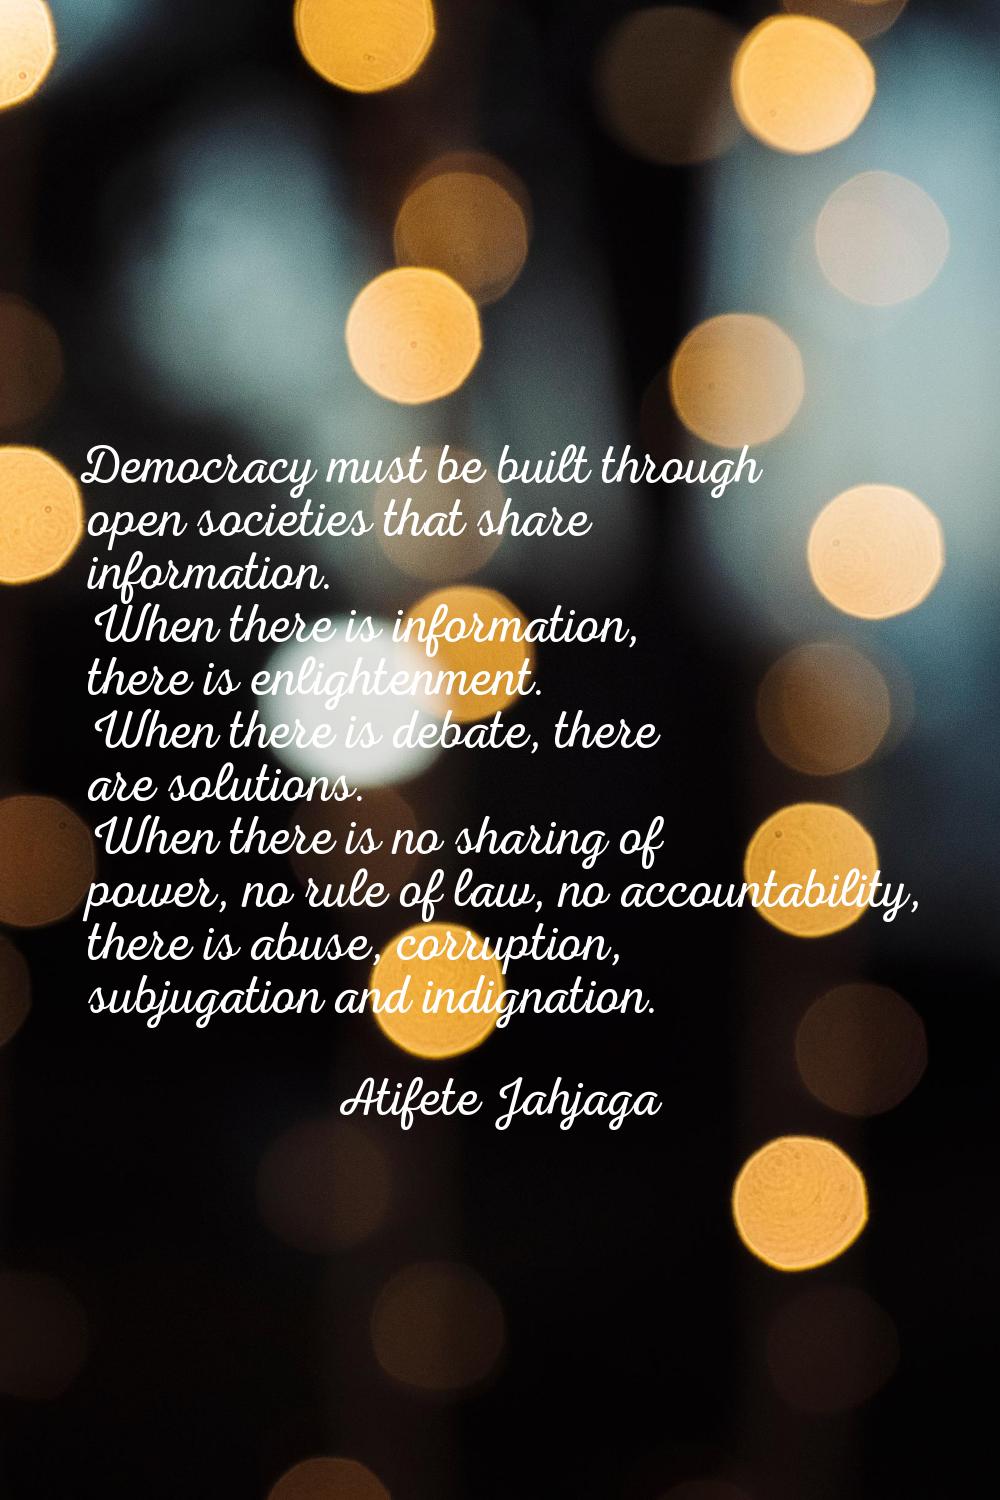 Democracy must be built through open societies that share information. When there is information, t